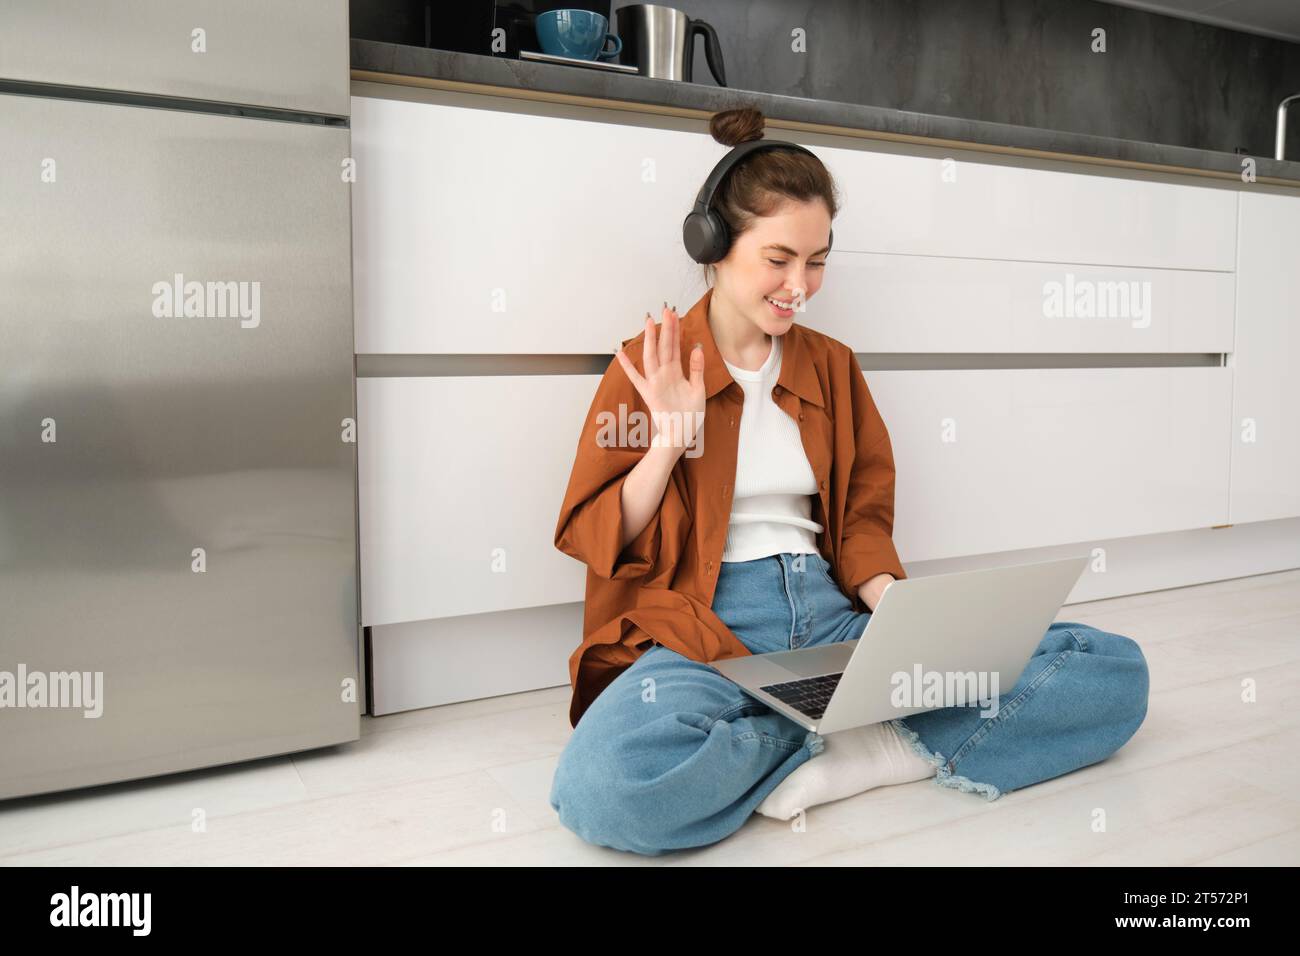 Remote workplace. Young woman works from home, sits on floor with headphones and laptop, student doing homework, studying online. Stock Photo